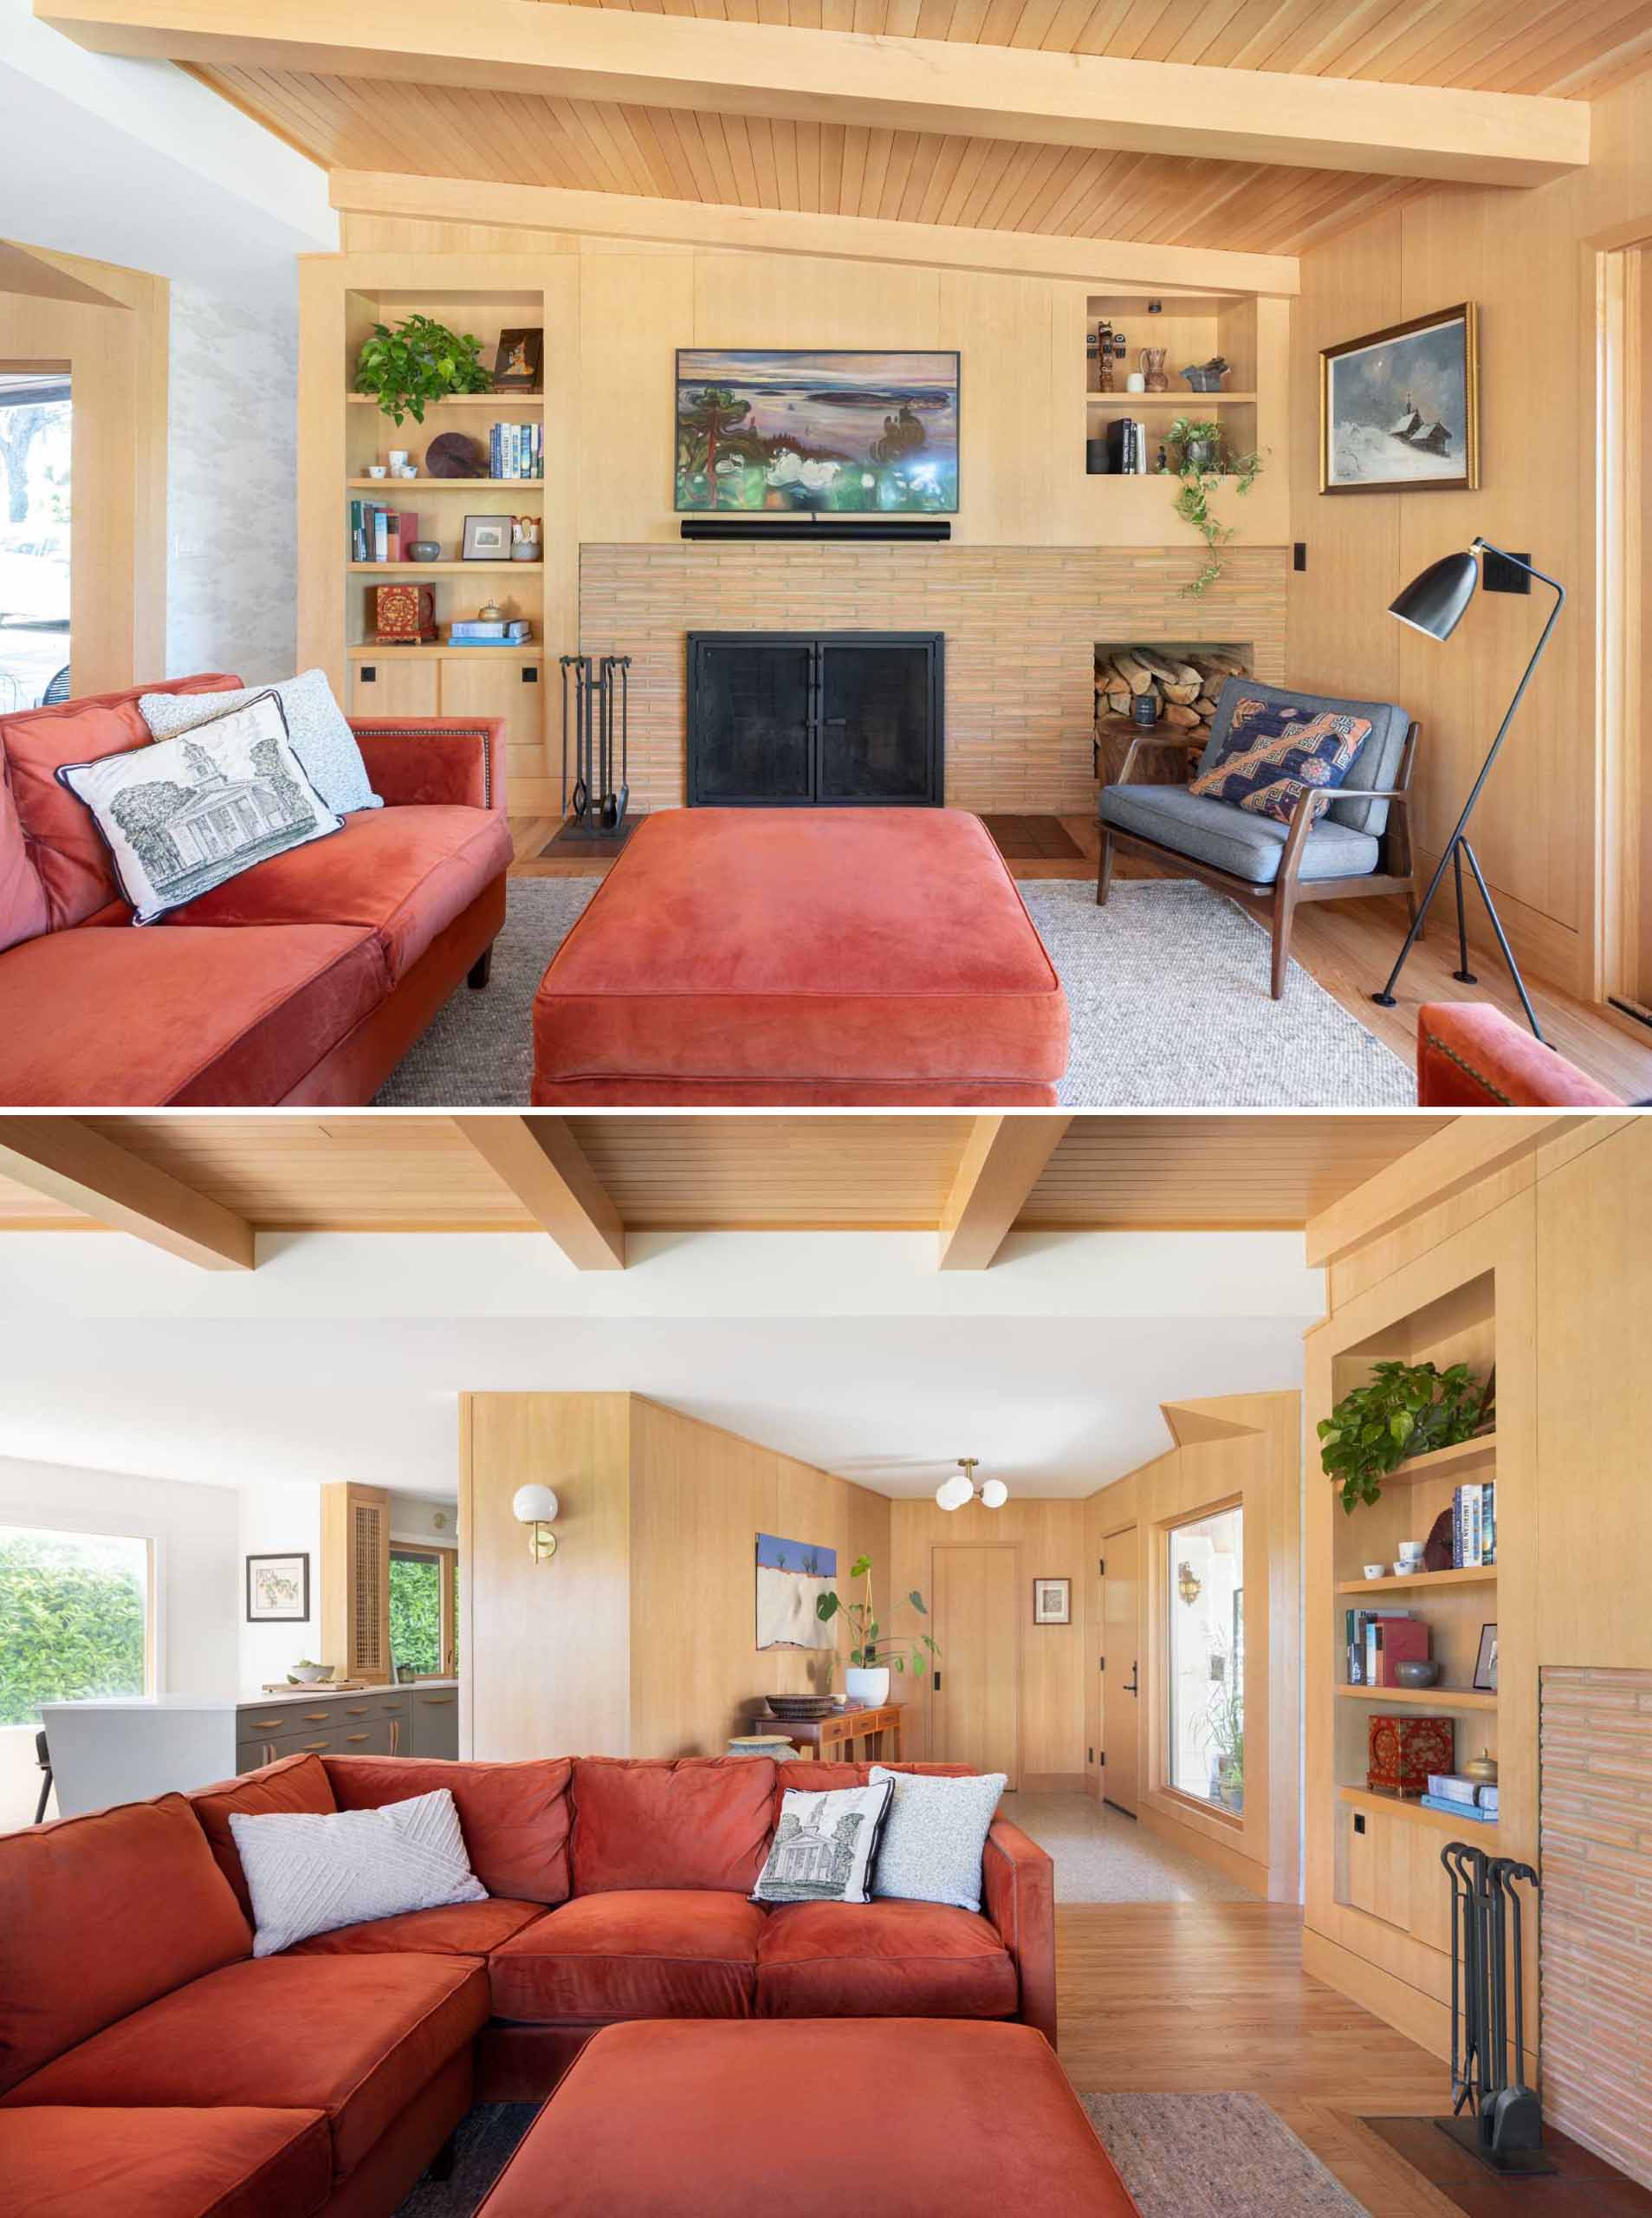 Before - The original living room of this mid-century modern home included a fireplace as well as built-in shelving.